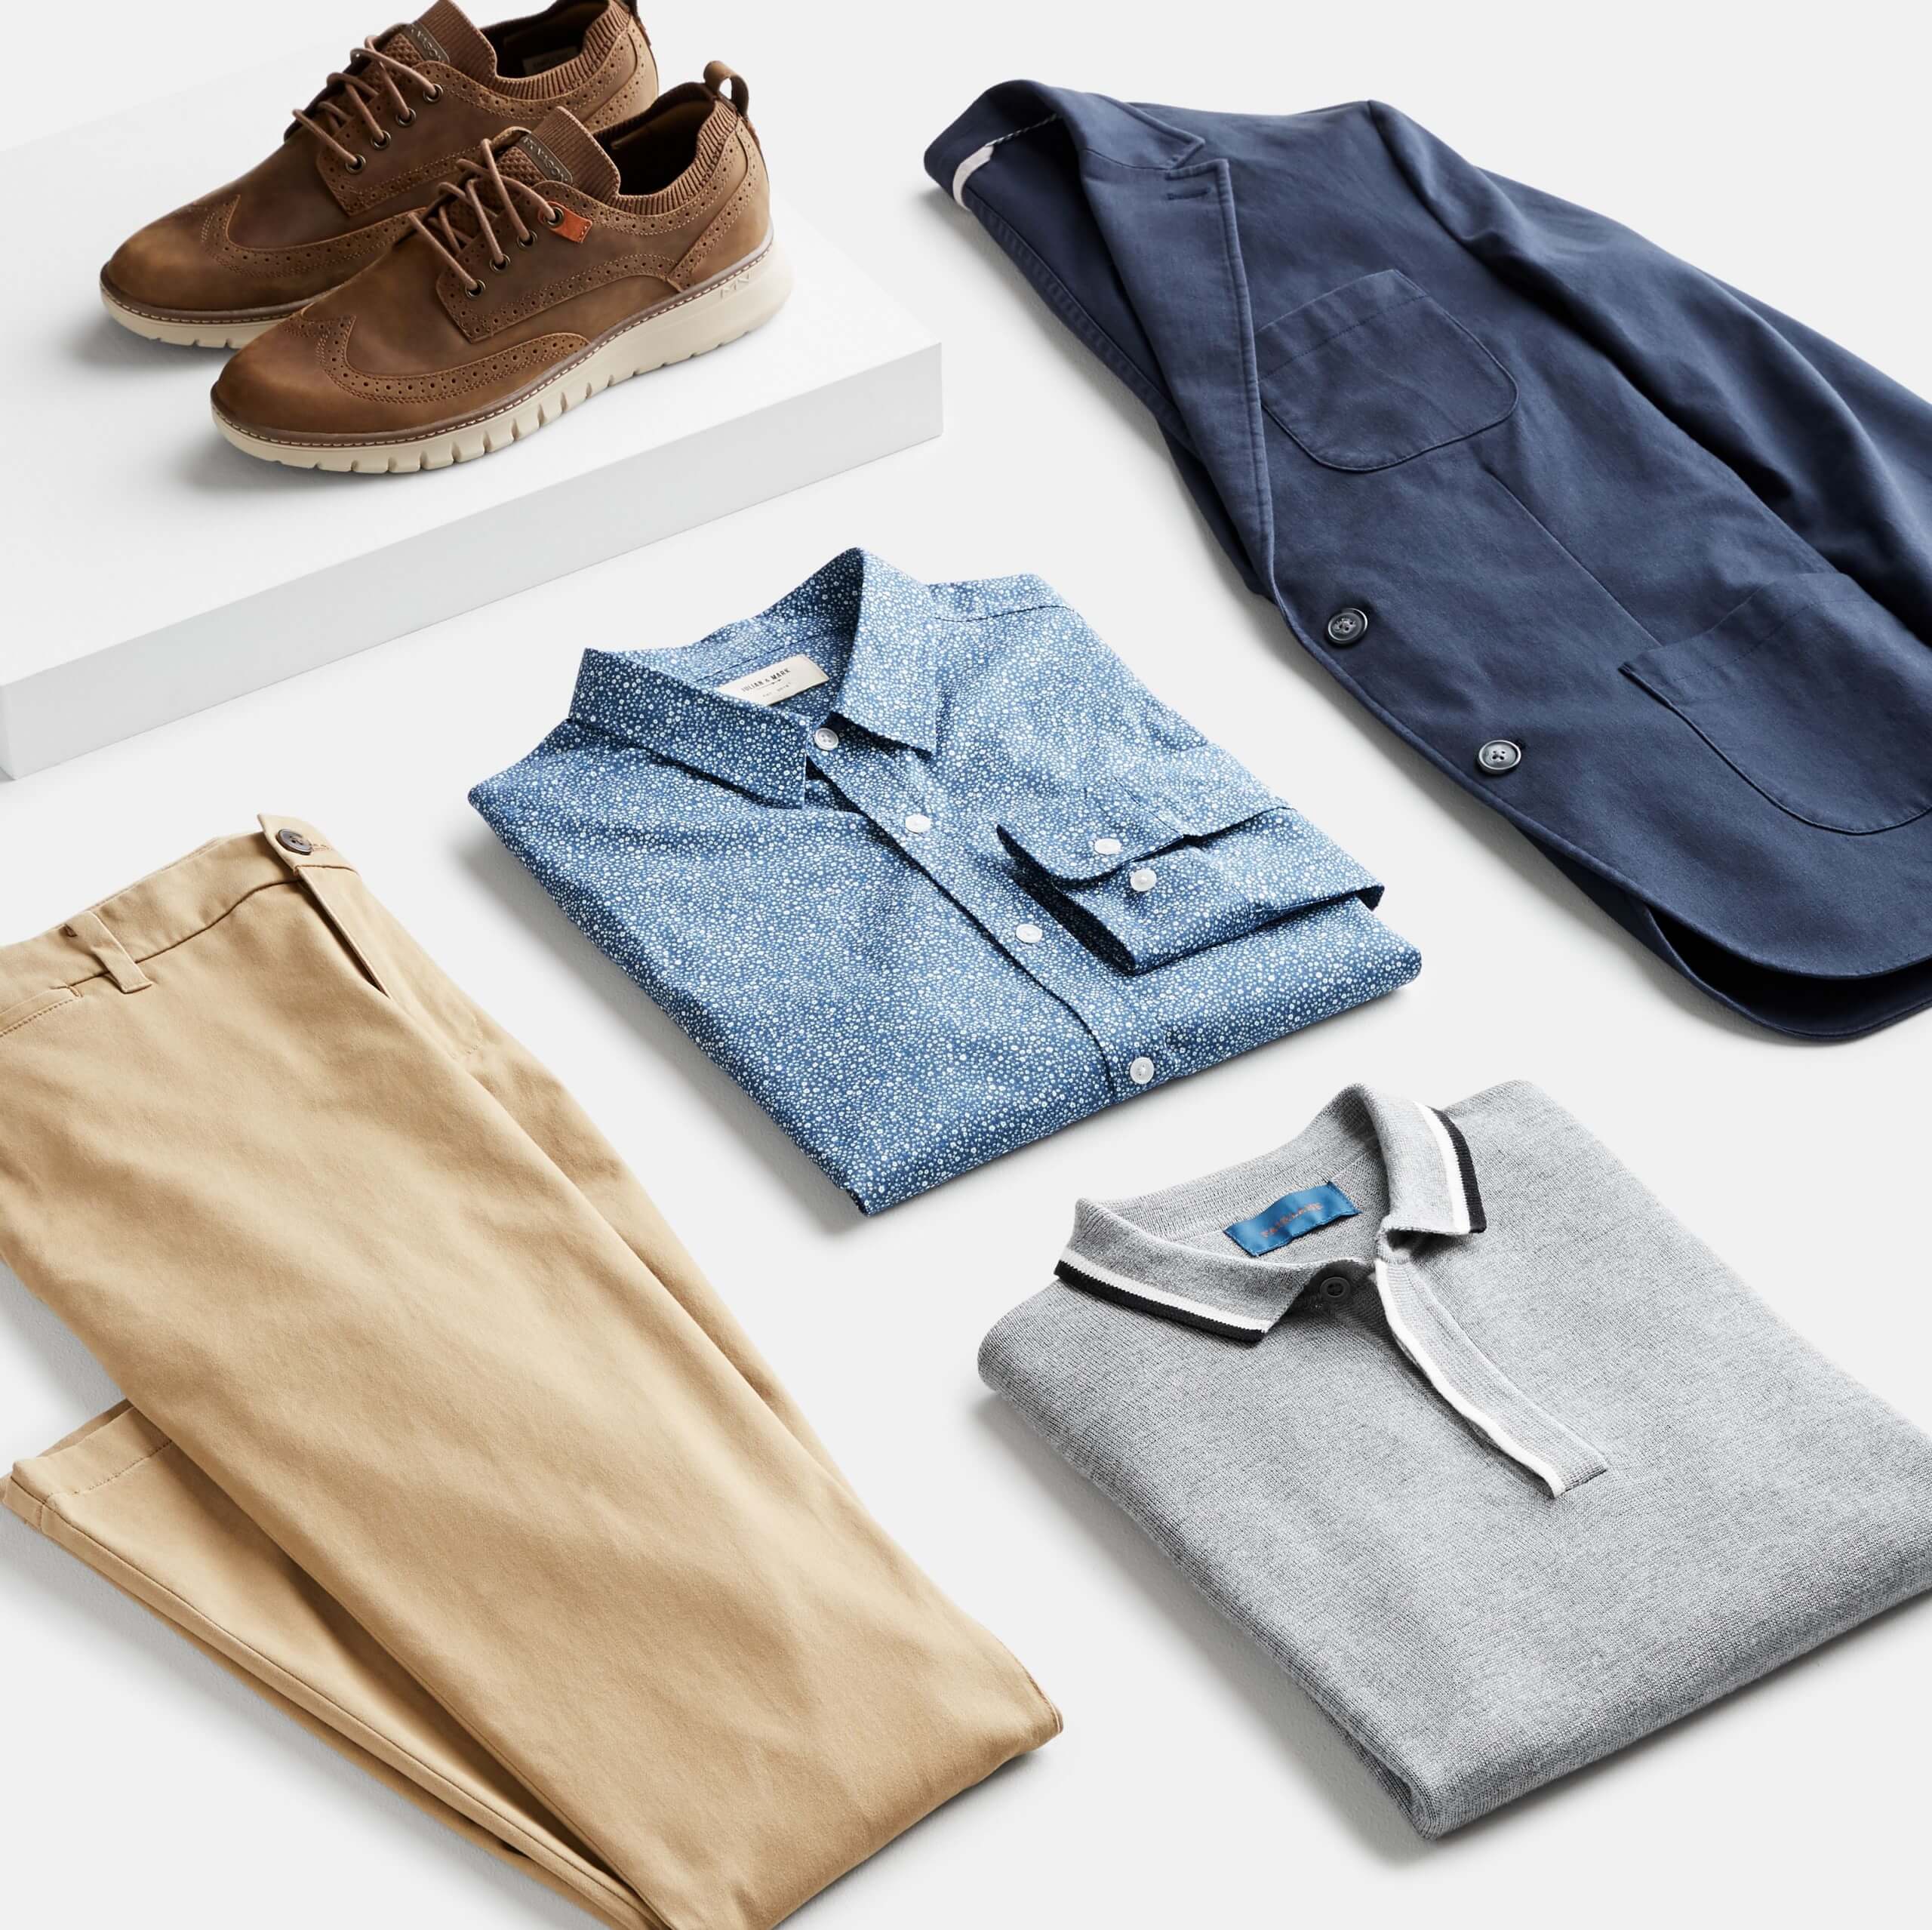 Stitch Fix Men’s outfit laydown featuring khaki pants, grey polo, chambray button-up, navy blazer and brown oxford shoes.